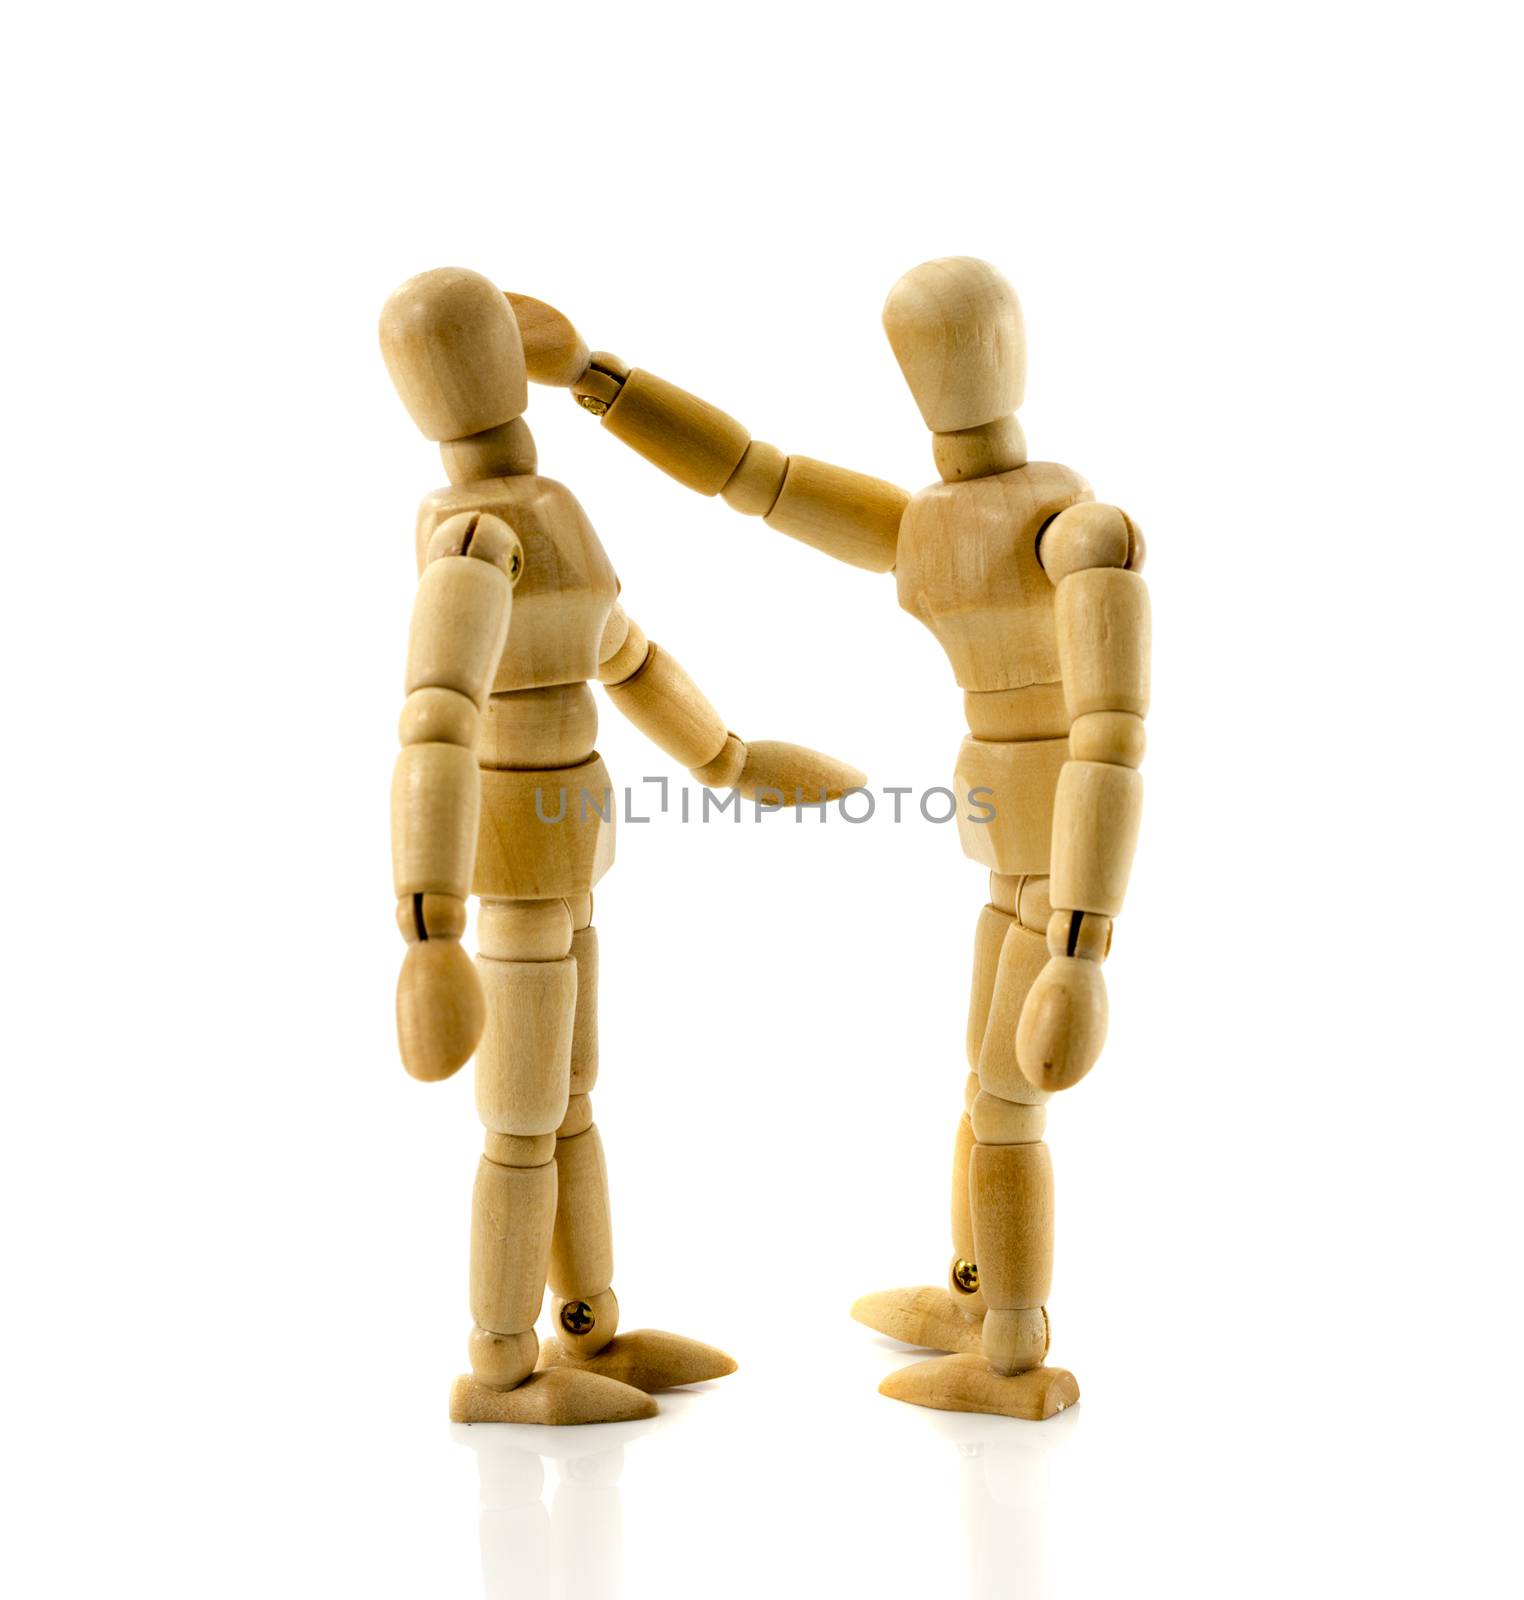 senseless violence wooden puppets on white background